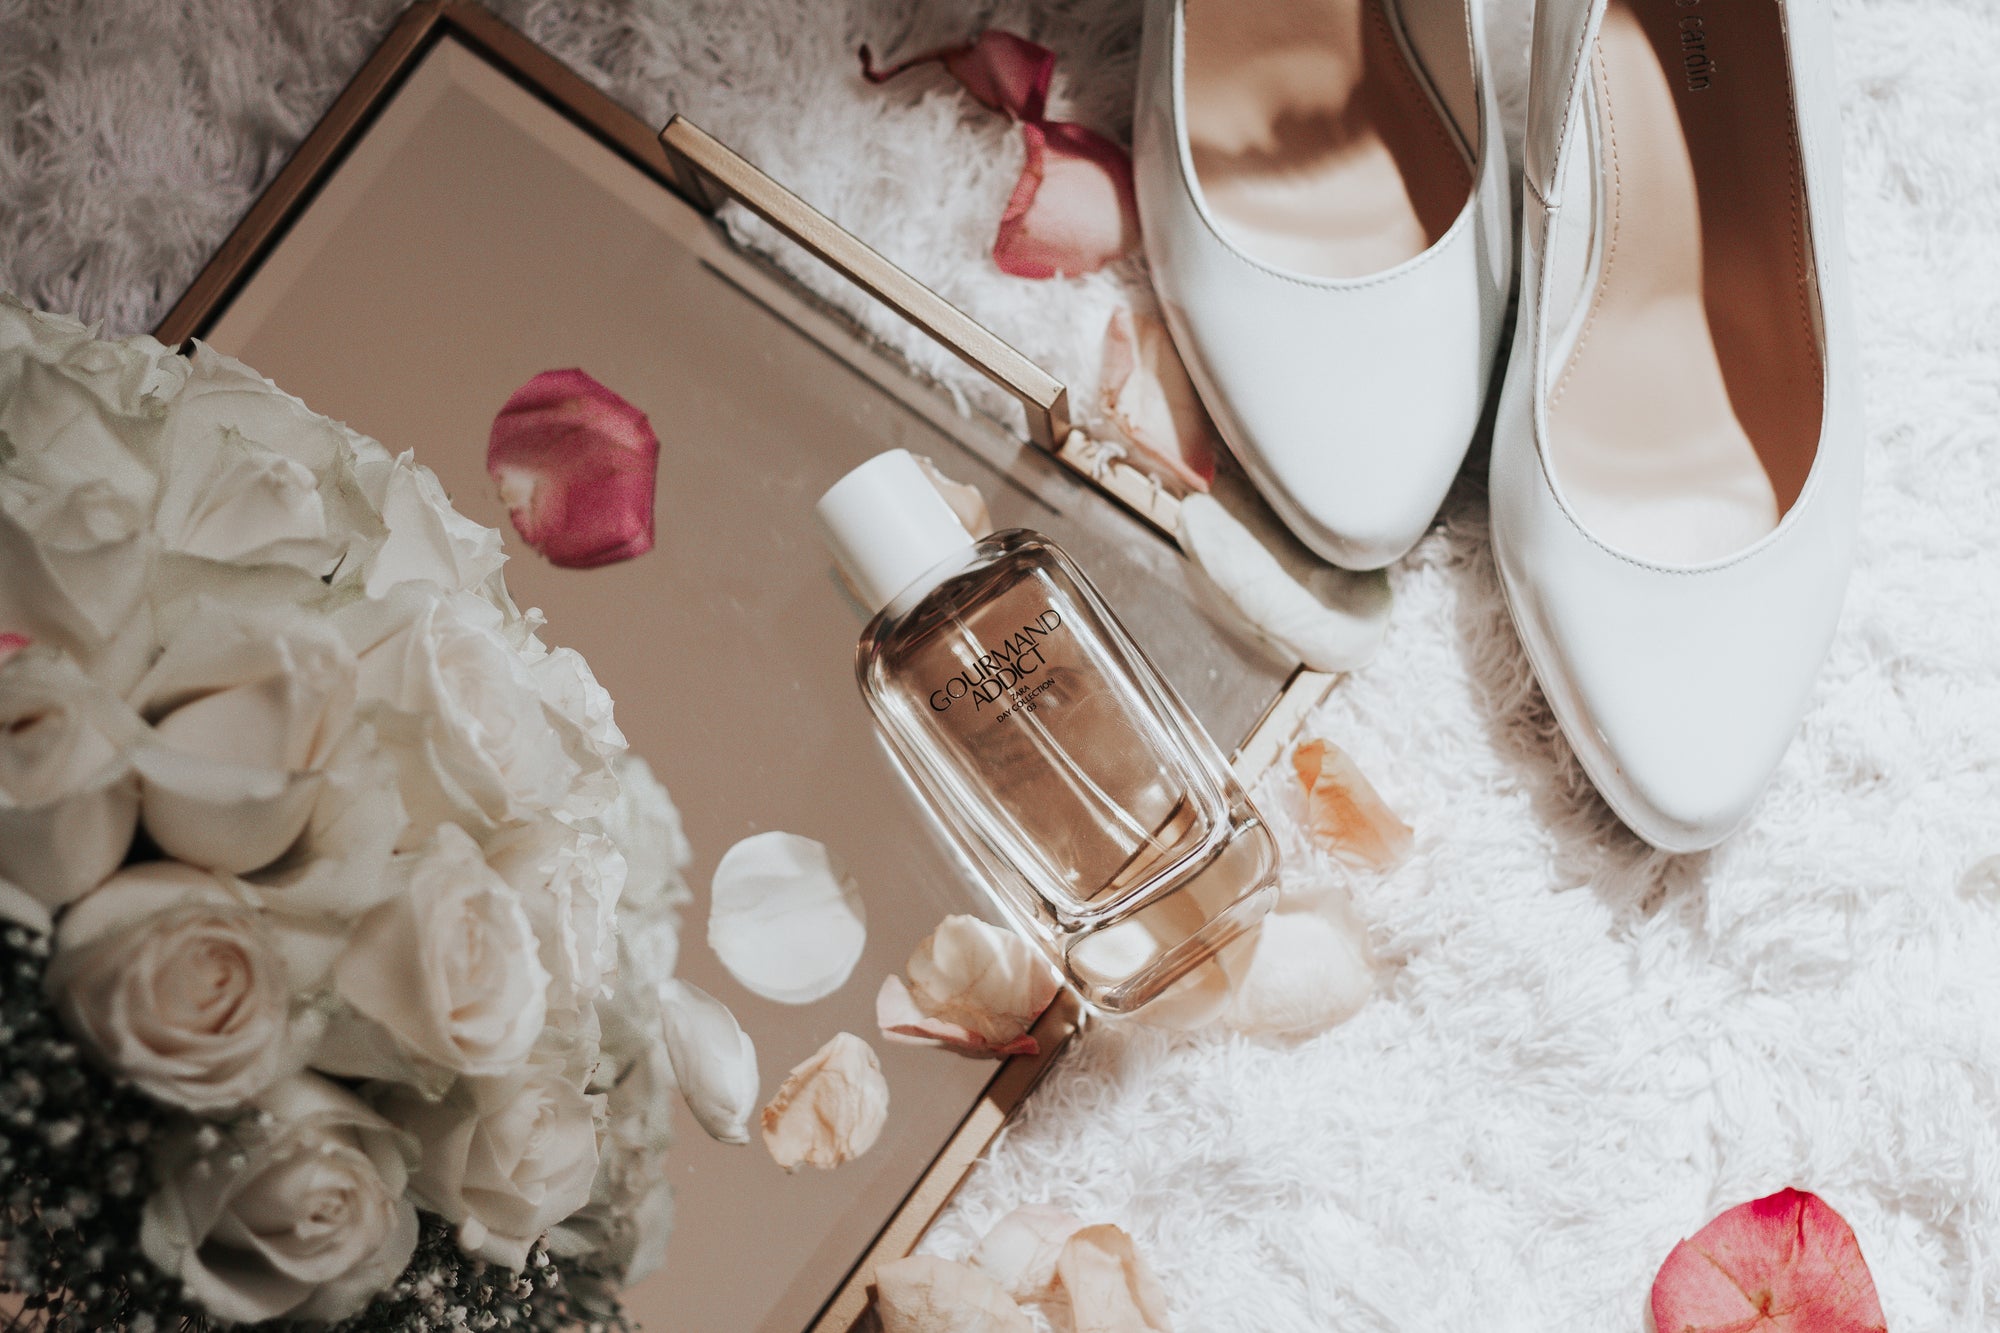 Top 5 Perfumes to Wear to a Wedding